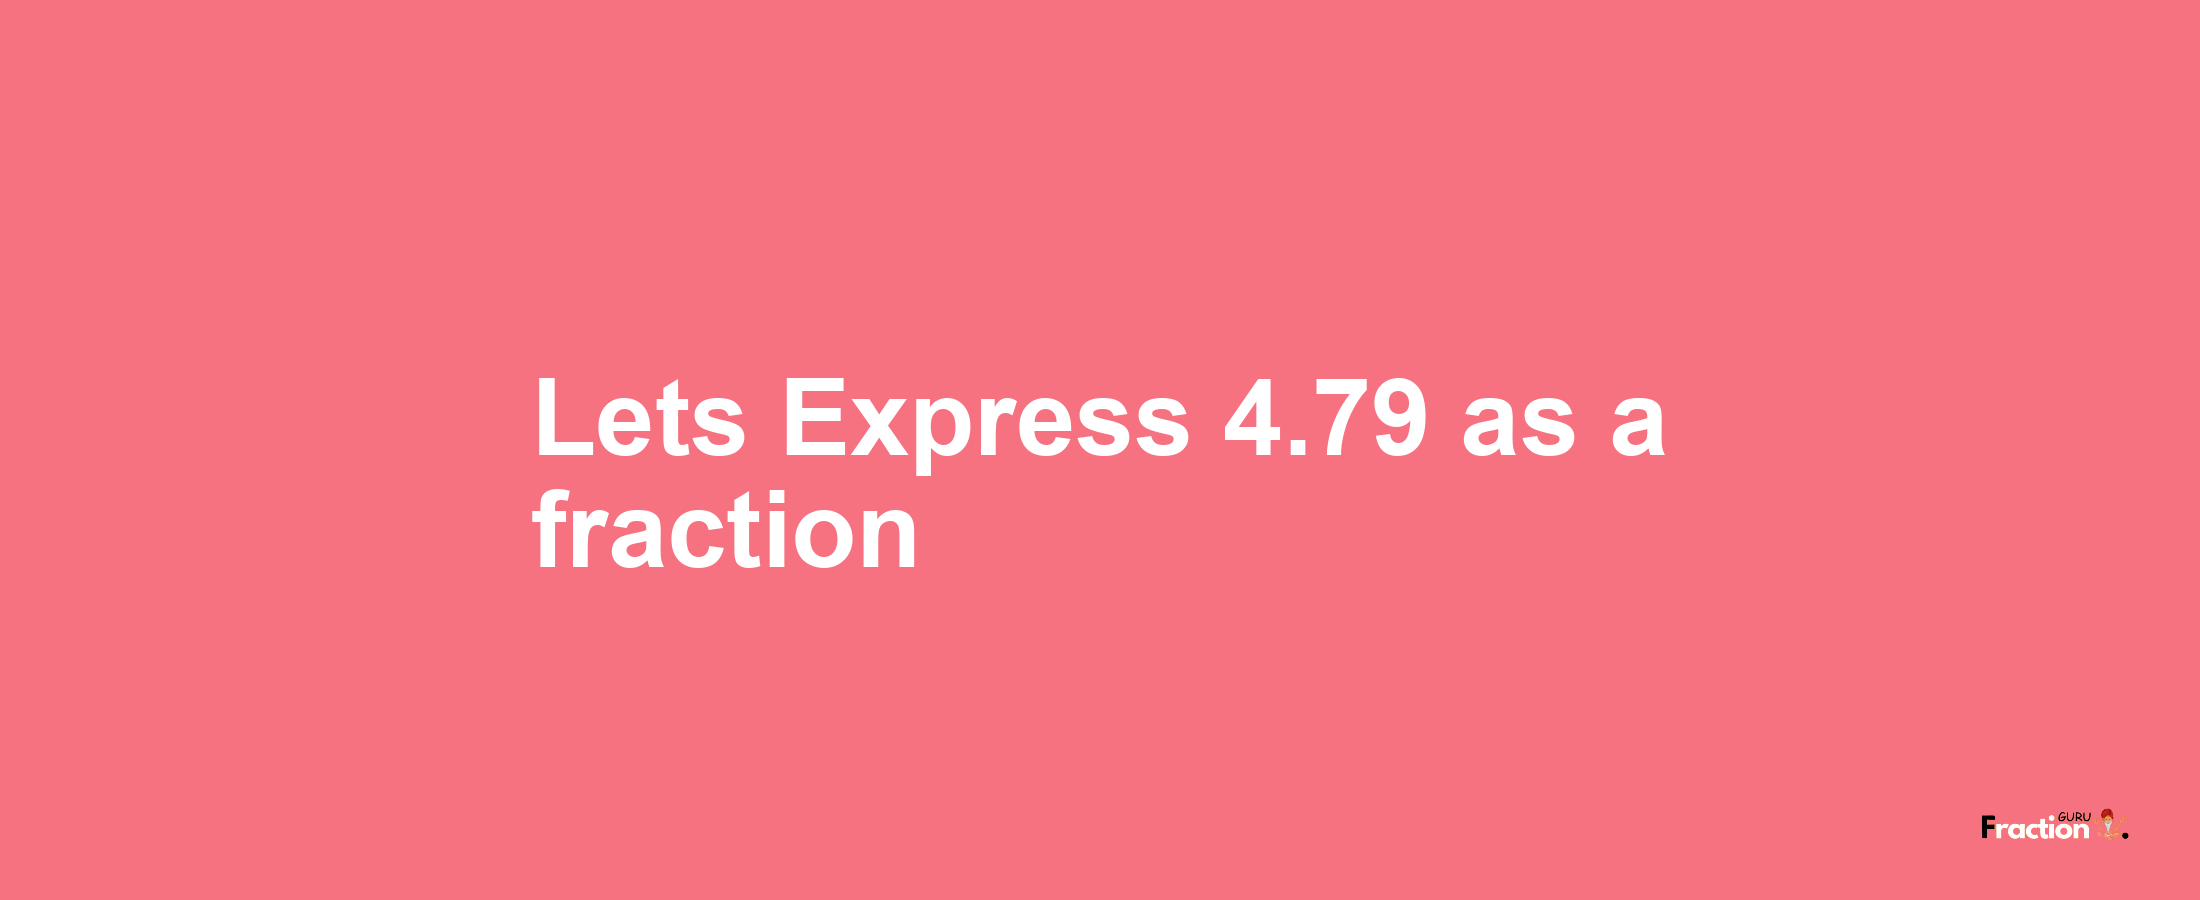 Lets Express 4.79 as afraction